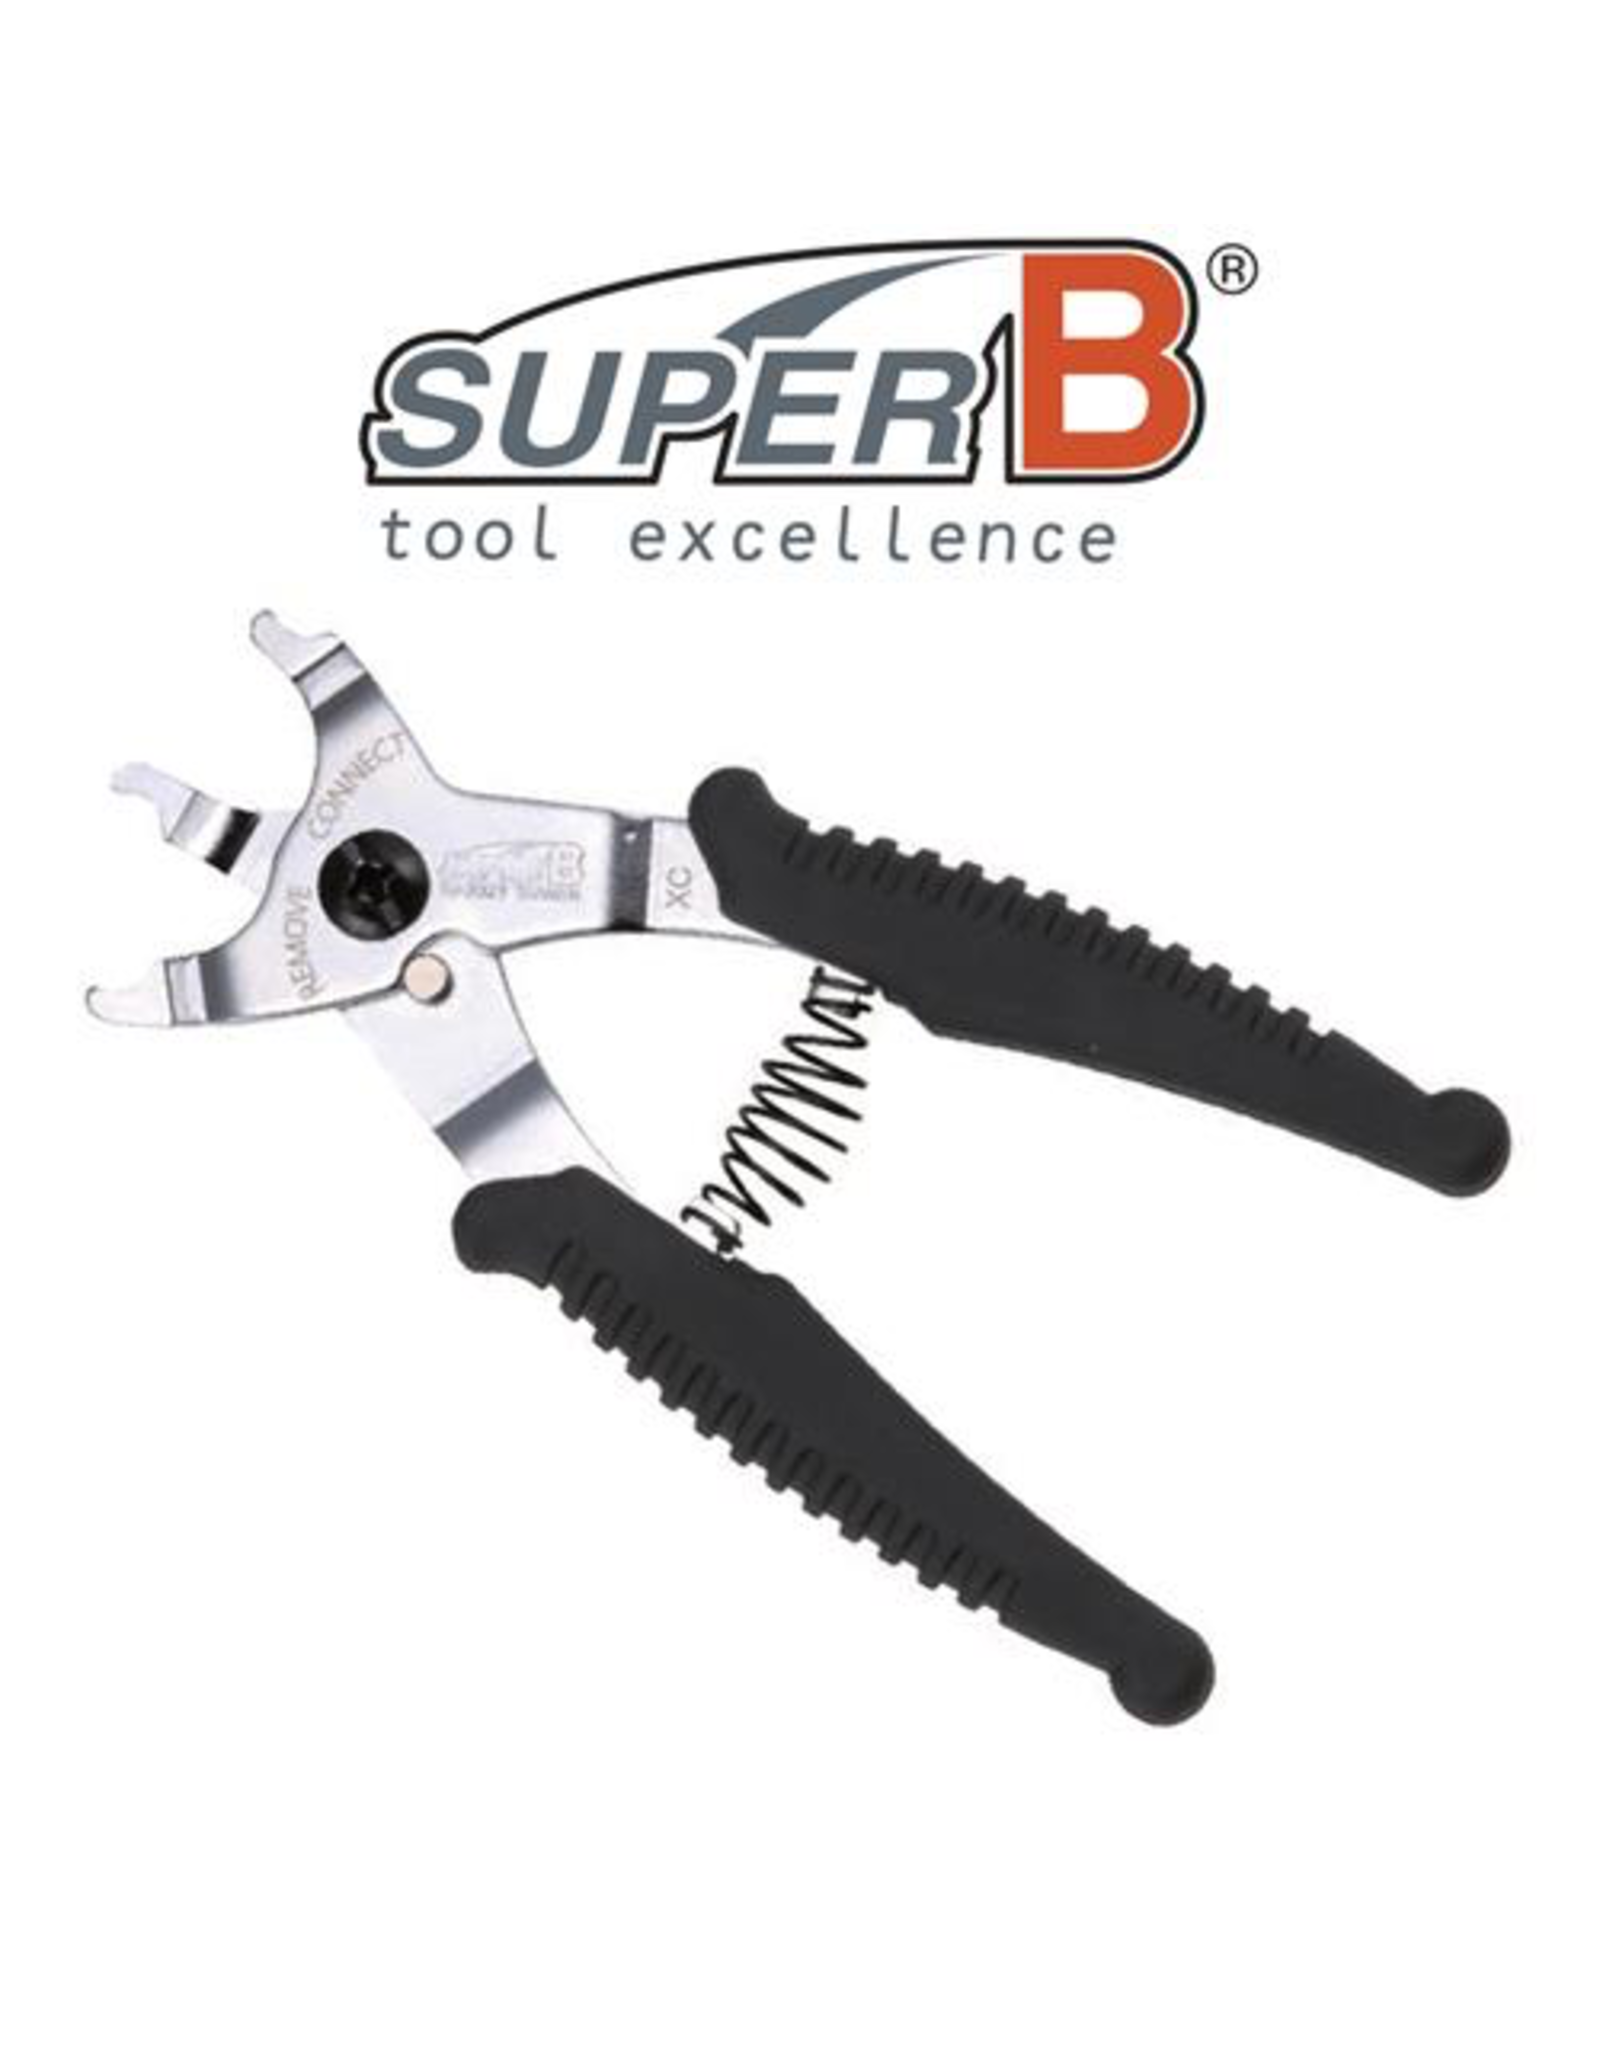 SUPER-B SUPER-B CLASSIC THE TRIDENT 2 IN 1 MASTER LINK PLIERS TOOL